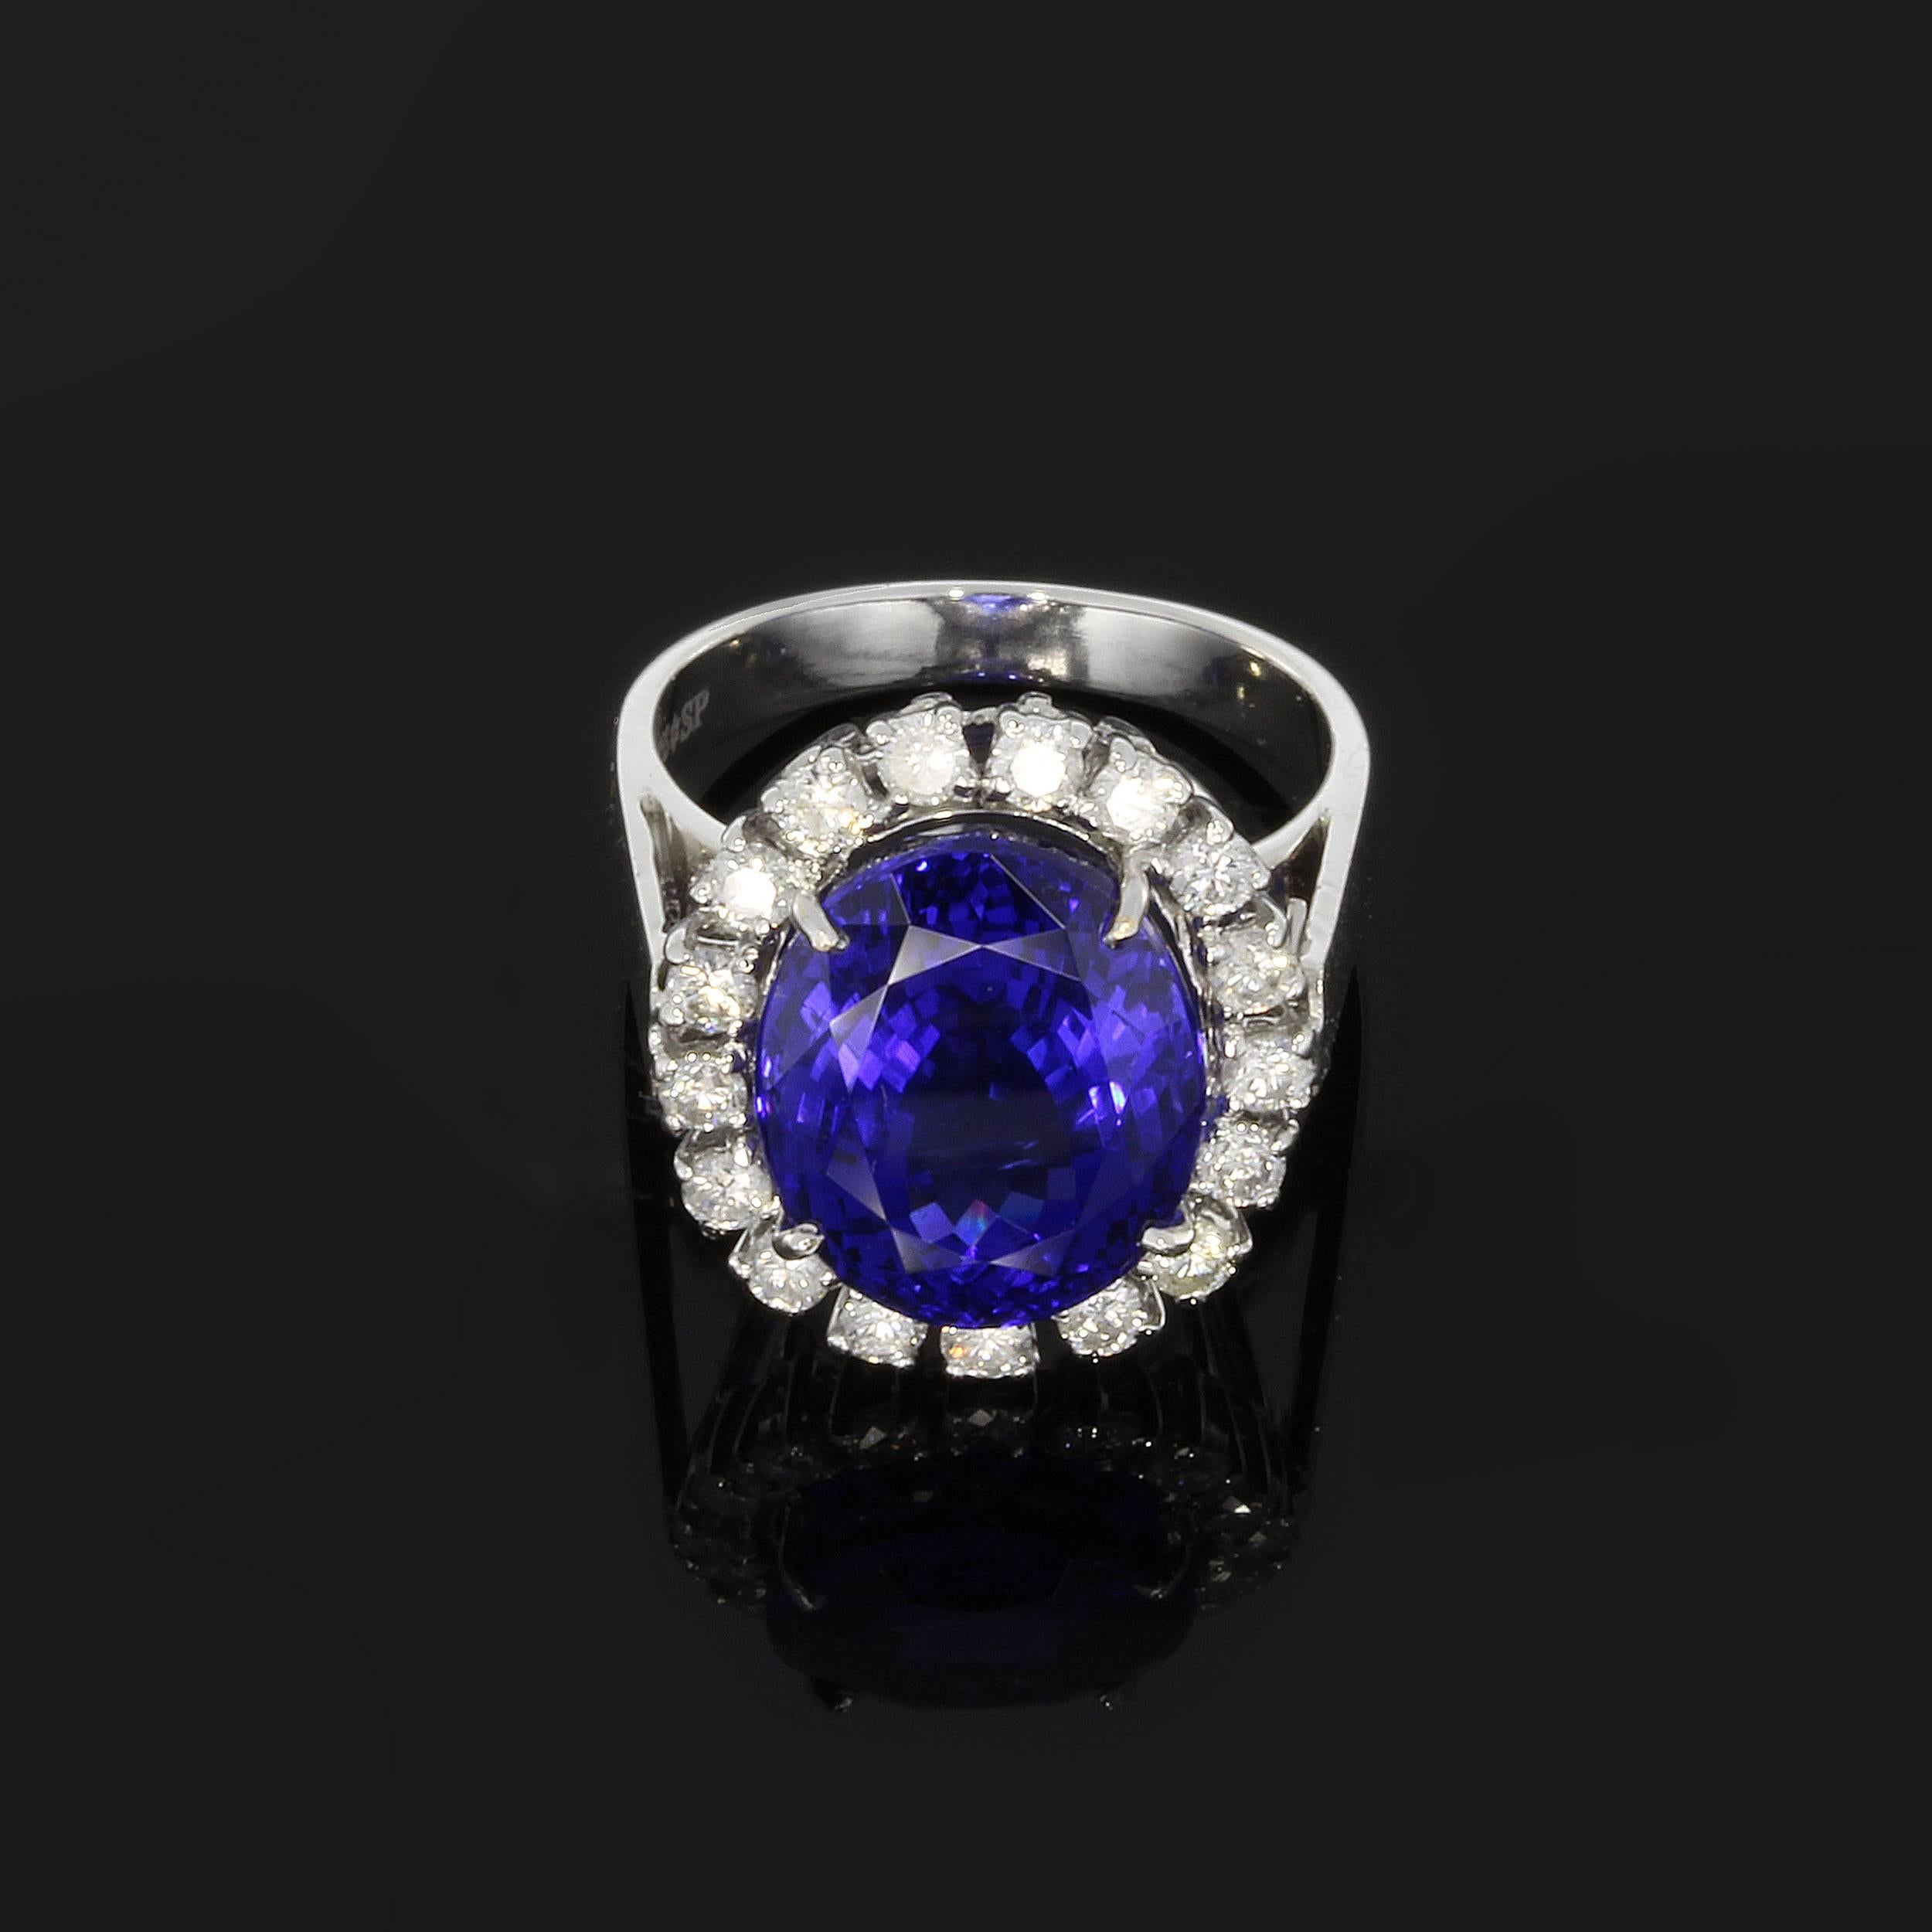 Germany, late 20th century. Set with oval shaped deep blue tanzanite weighing 11.56 ct. Surrounded by 17 diamonds totally 1.0 ct. color: Top Wesselton ( TW ), clarity: VVSI. Mounted in 14K white gold. Hallmarked inside with 585S star SP. Weight: